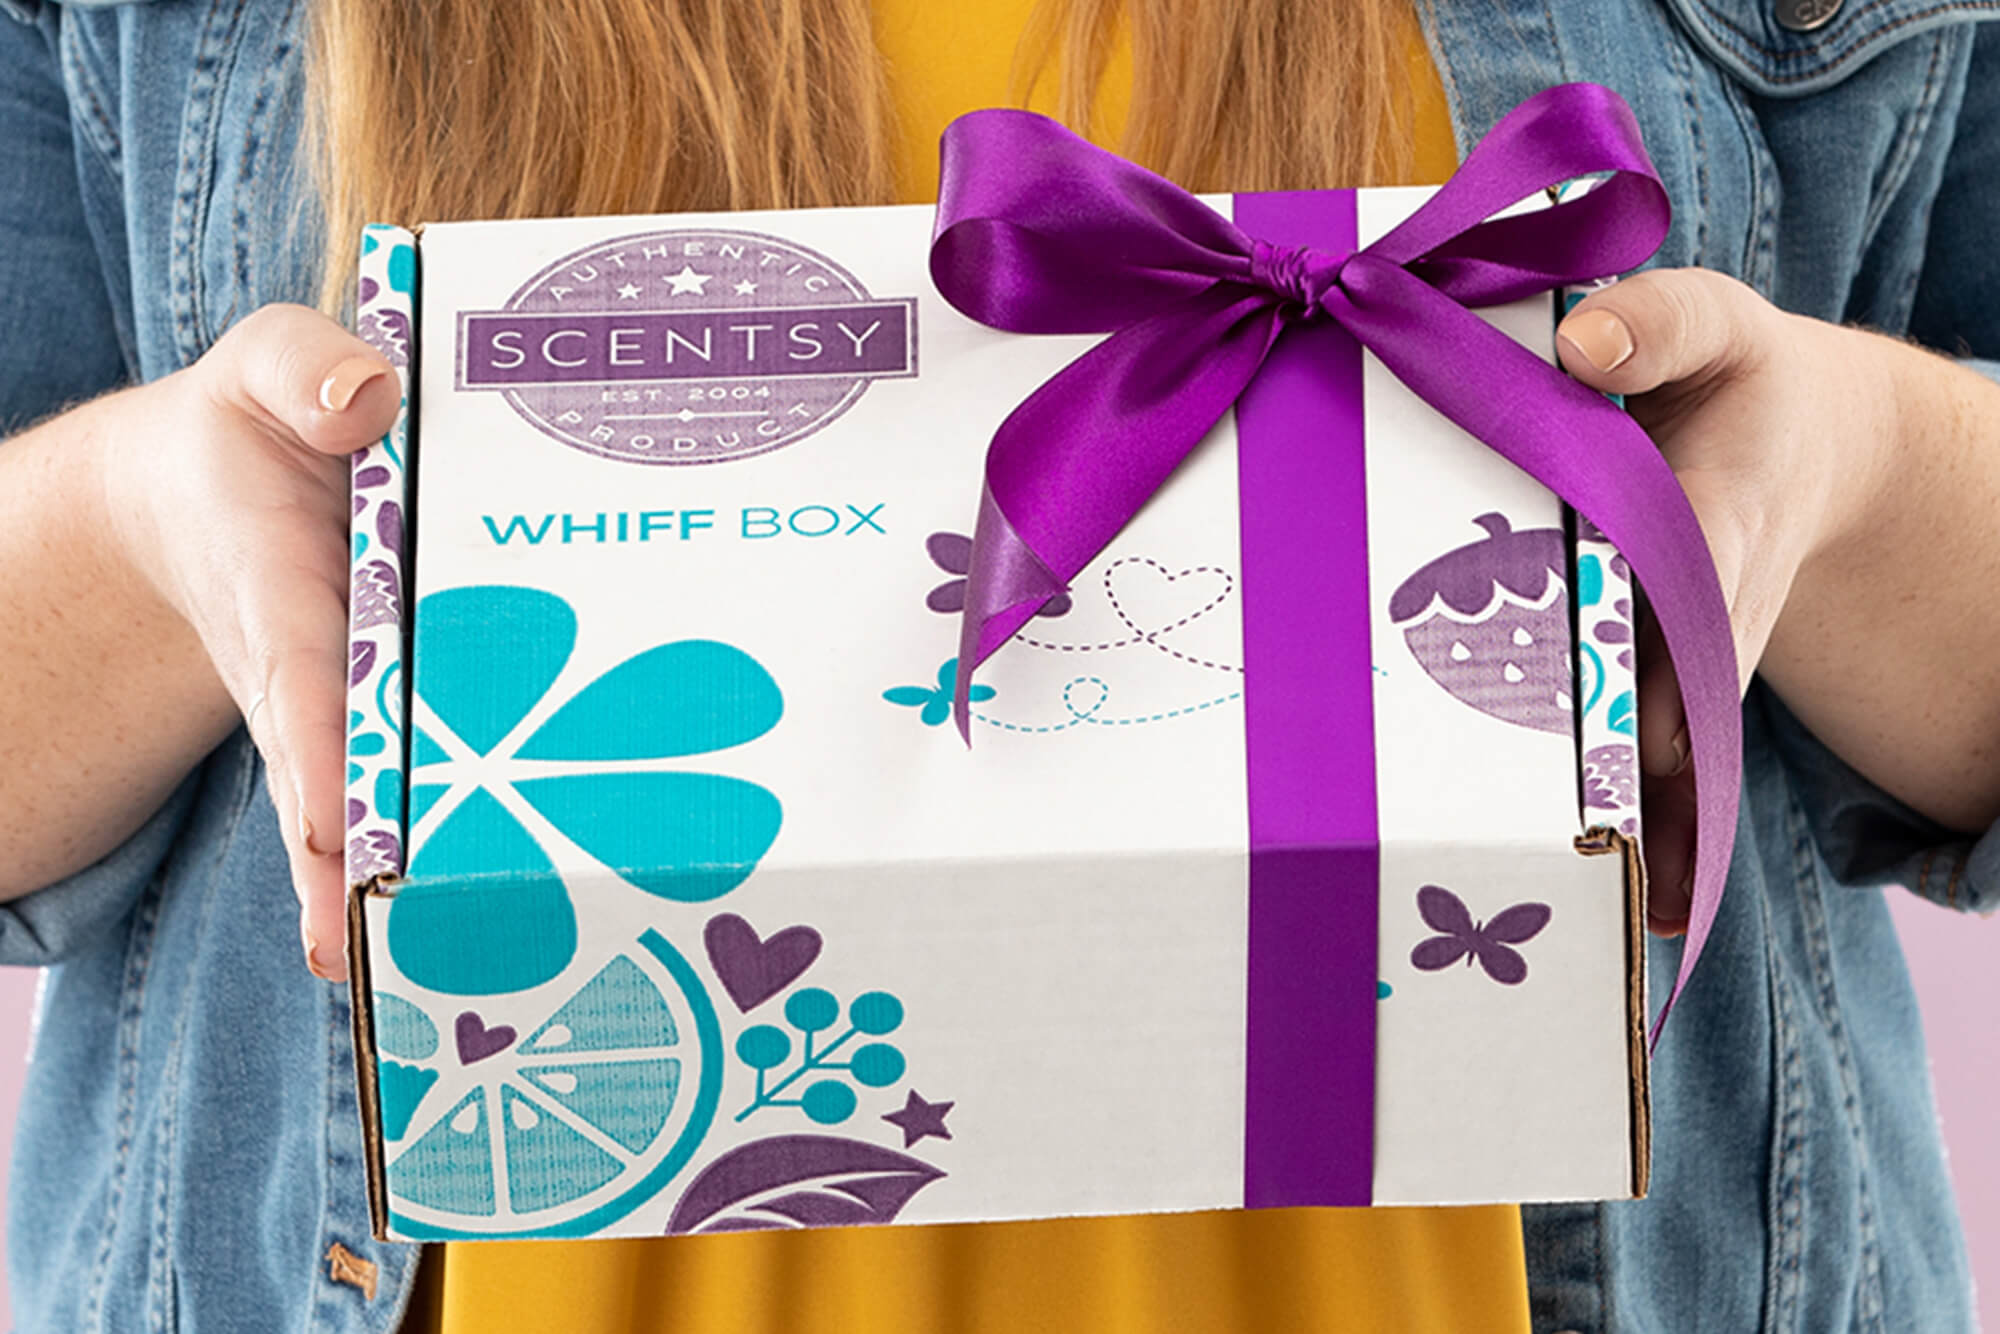 What is Scentsy Whiff Box? Scentsy Blog